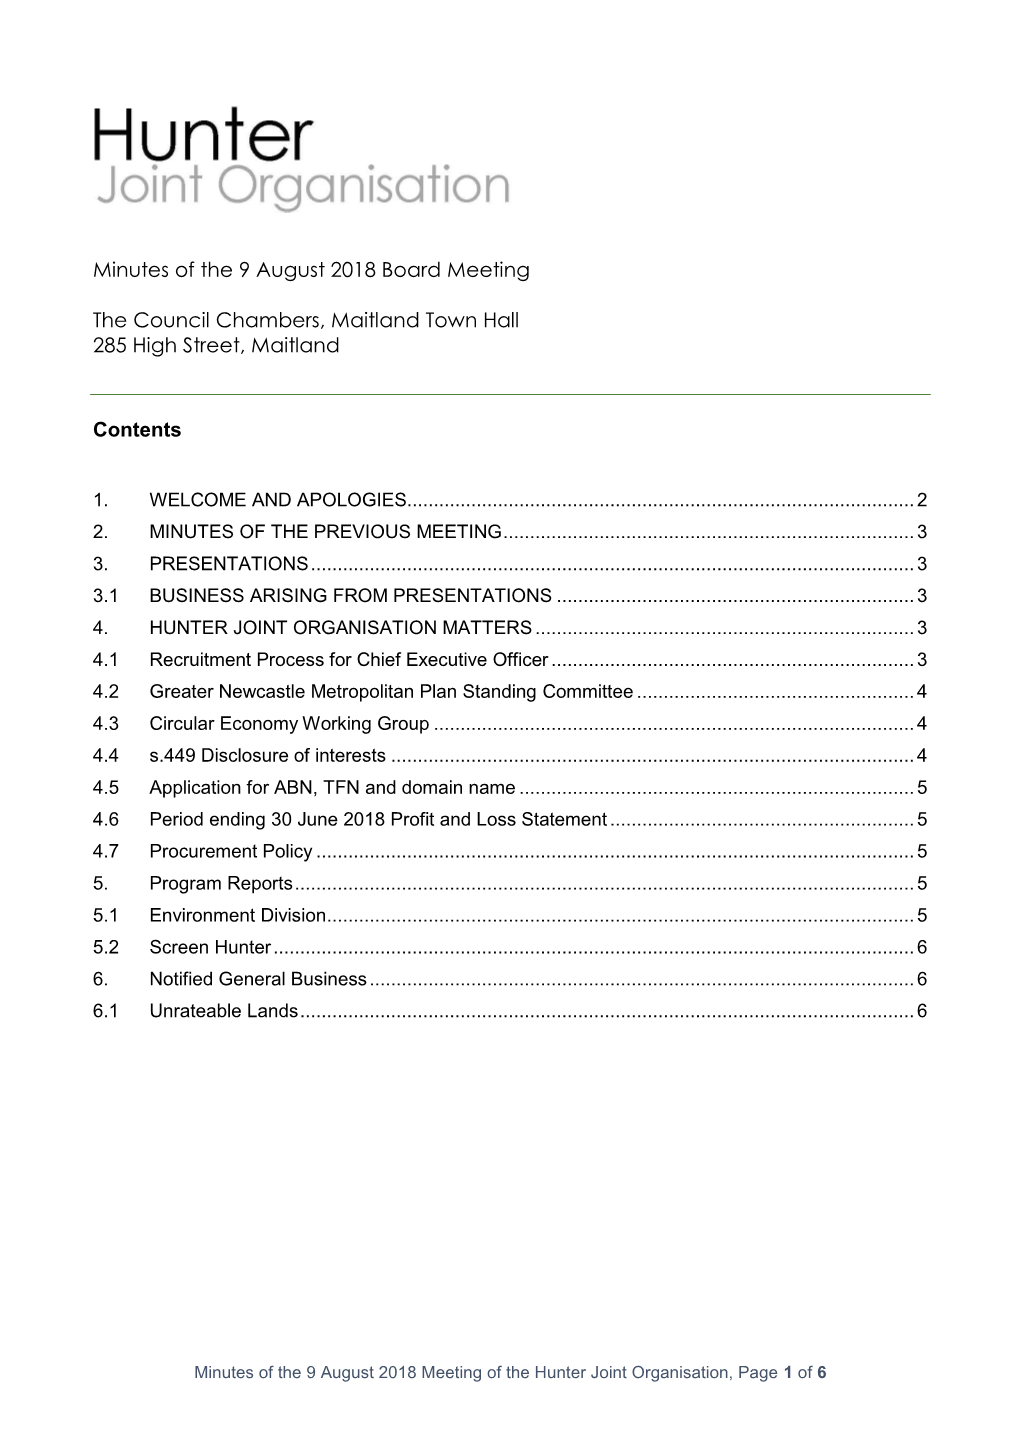 Minutes of the 9 August 2018 Board Meeting